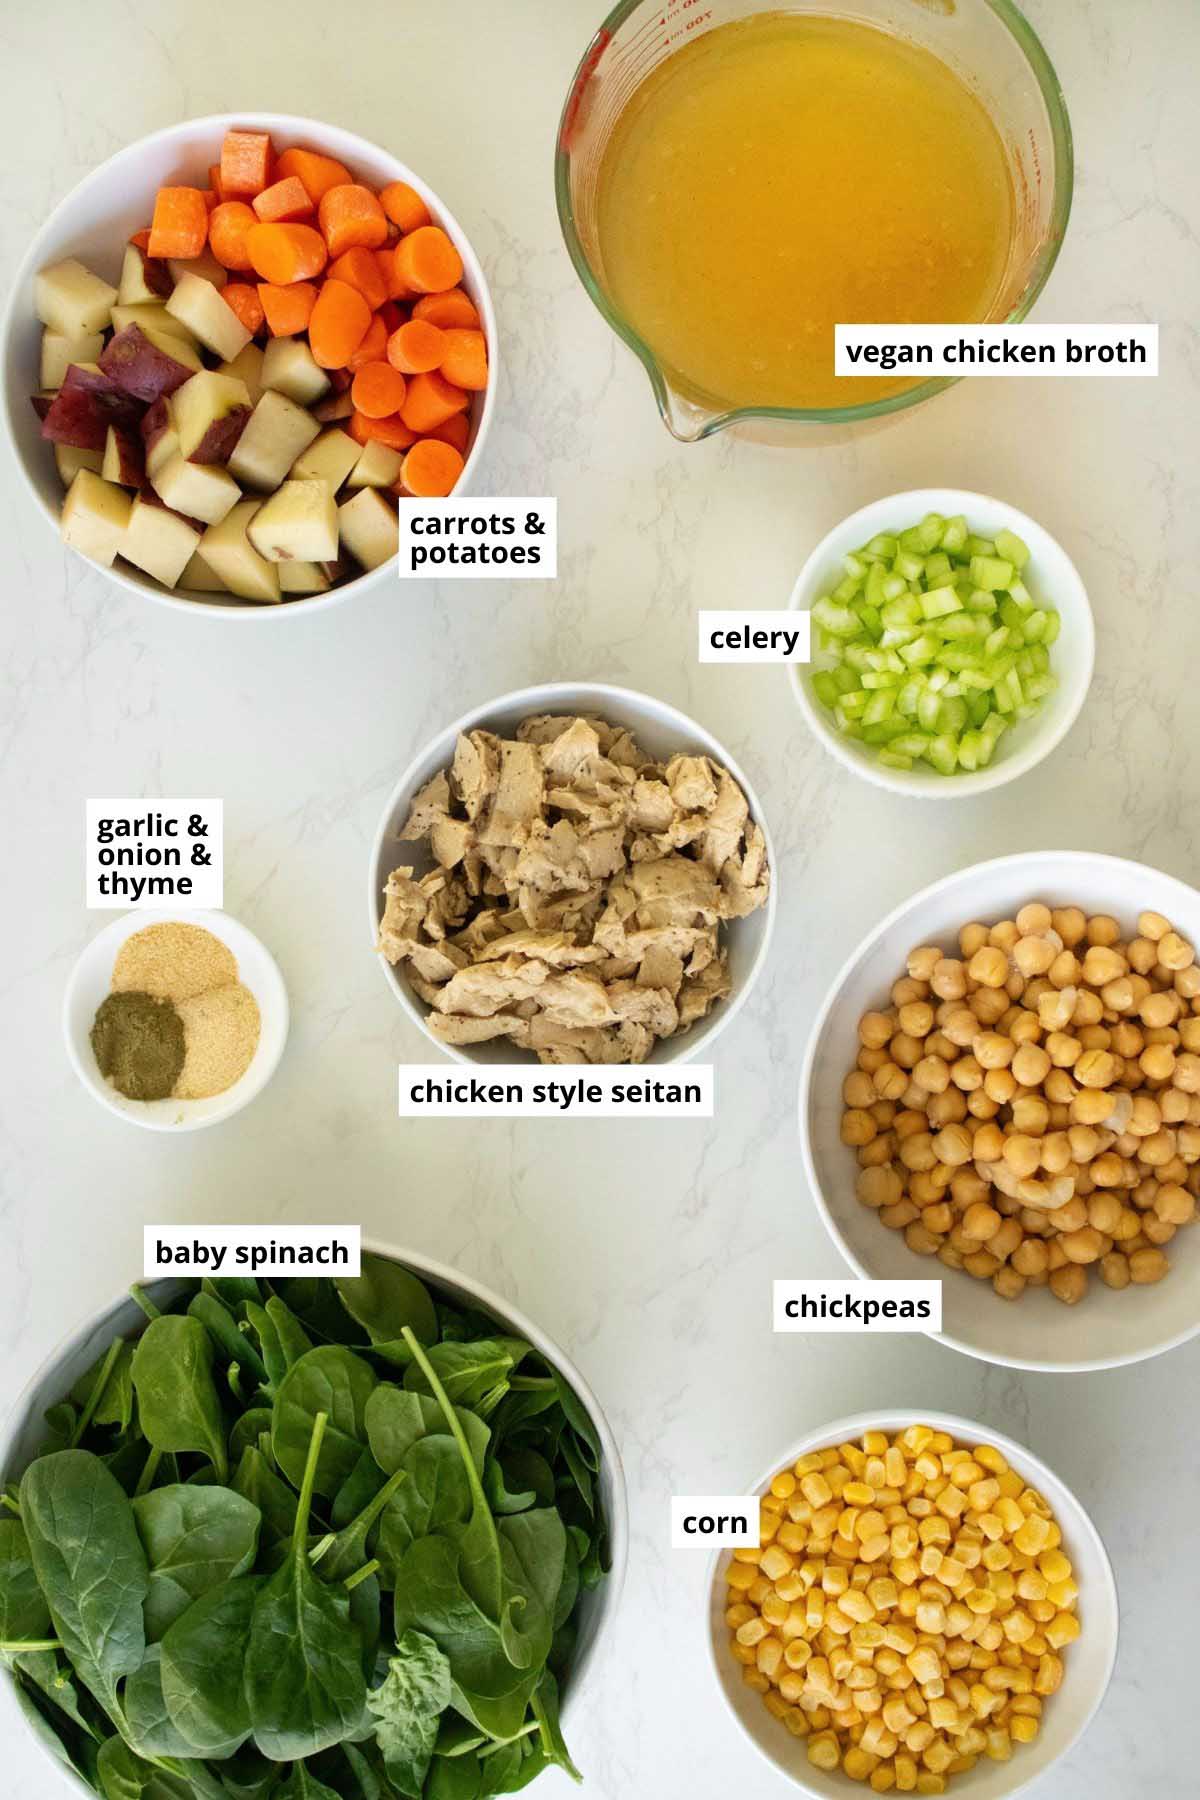 veggies, vegan chicken, chickpeas, and other stew ingredients on a white table